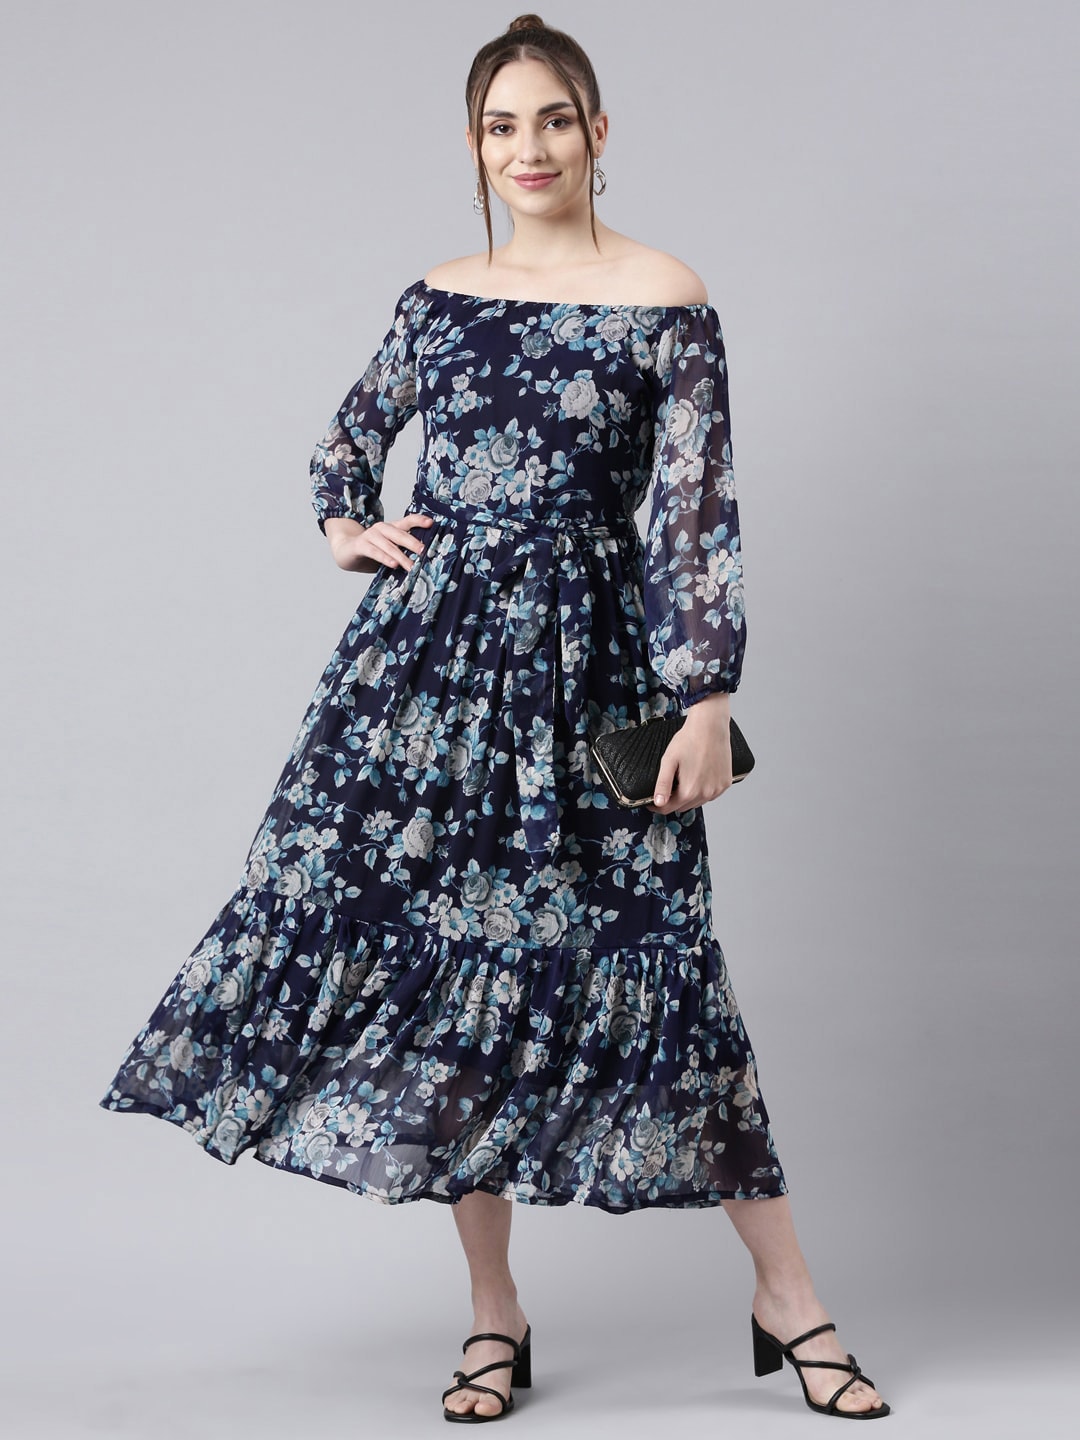 Souchii Floral Printed Off- Shoulder Long Sleeves Fit & flare Dress Price in India